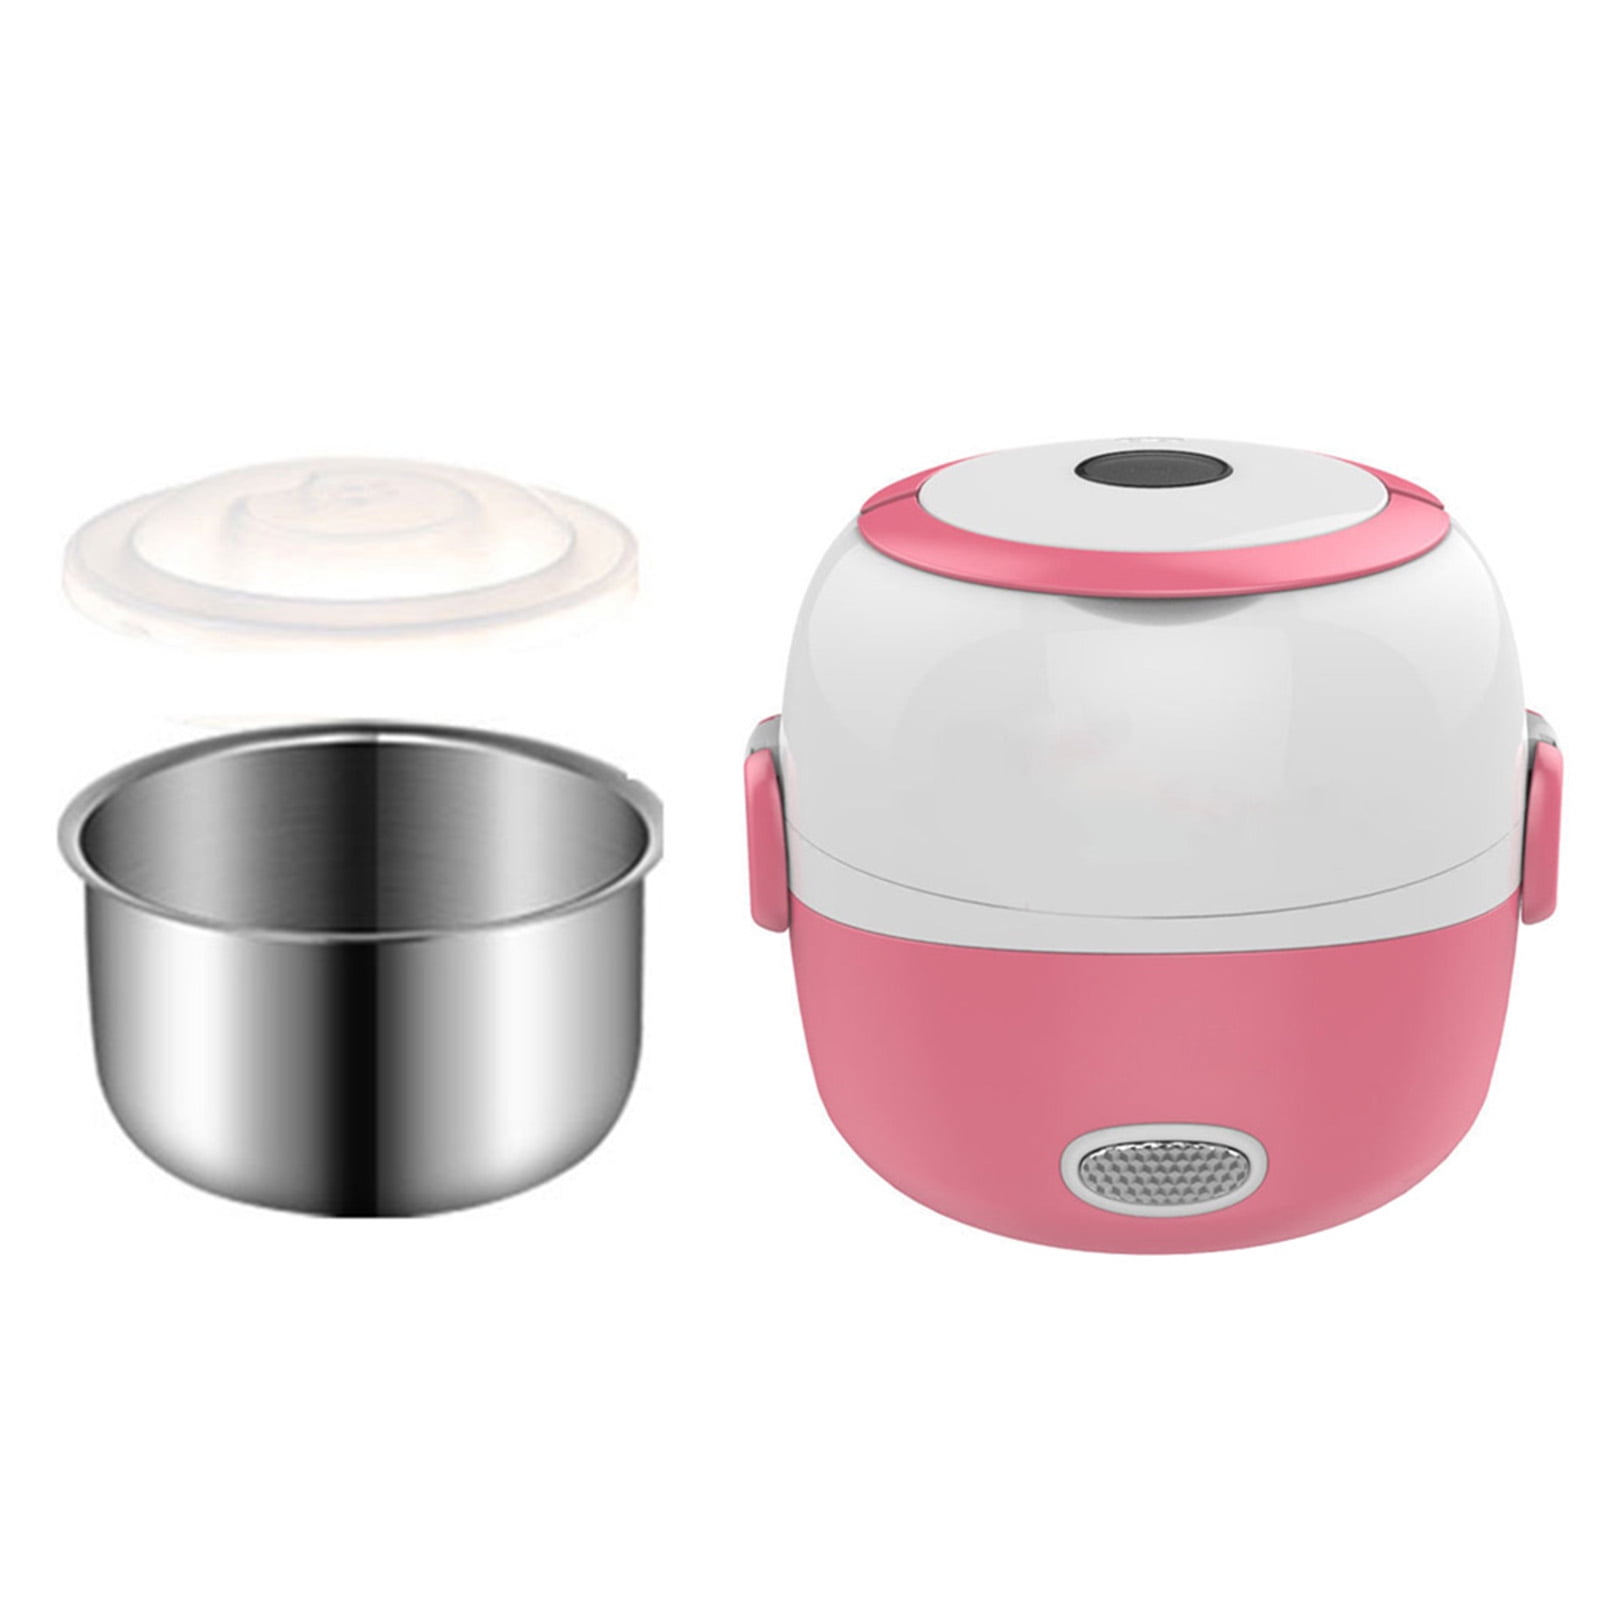 Bear MINI Rice Cooker Thermal Heating Electric Lunch Box 3 Layers Portable  Food Steamer Cooking Container Meal Warmer DFH-B15X3